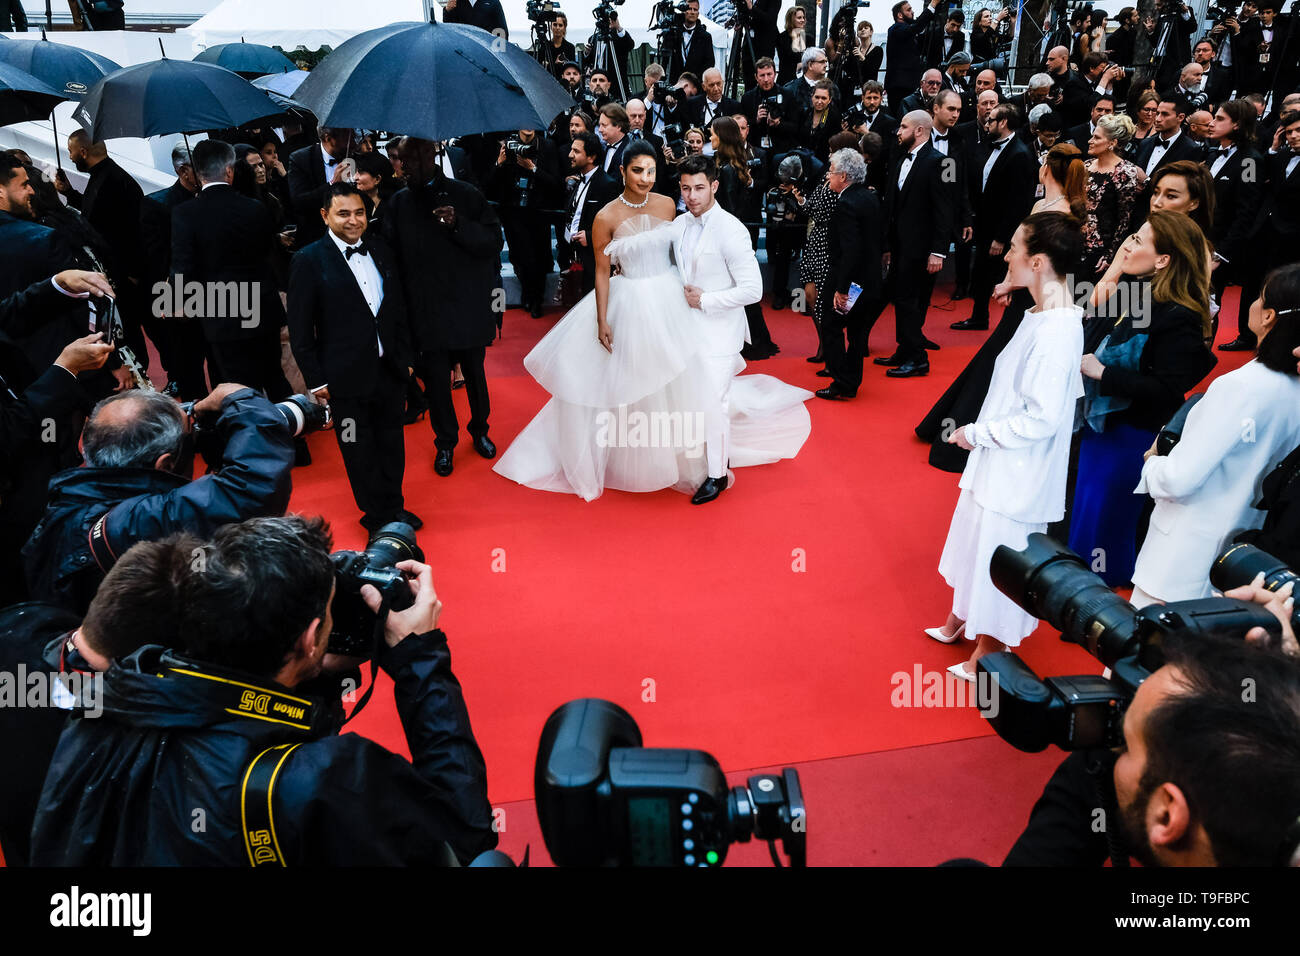 Nick Jonas and Priyanka Chopra poses  on the red carpet for The Best Years of a Life on Saturday 18 May 2019 at the 72nd Festival de Cannes, Palais des Festivals, Cannes. Pictured: Nick Jonas , Priyanka Chopra. Picture by Julie Edwards. Stock Photo